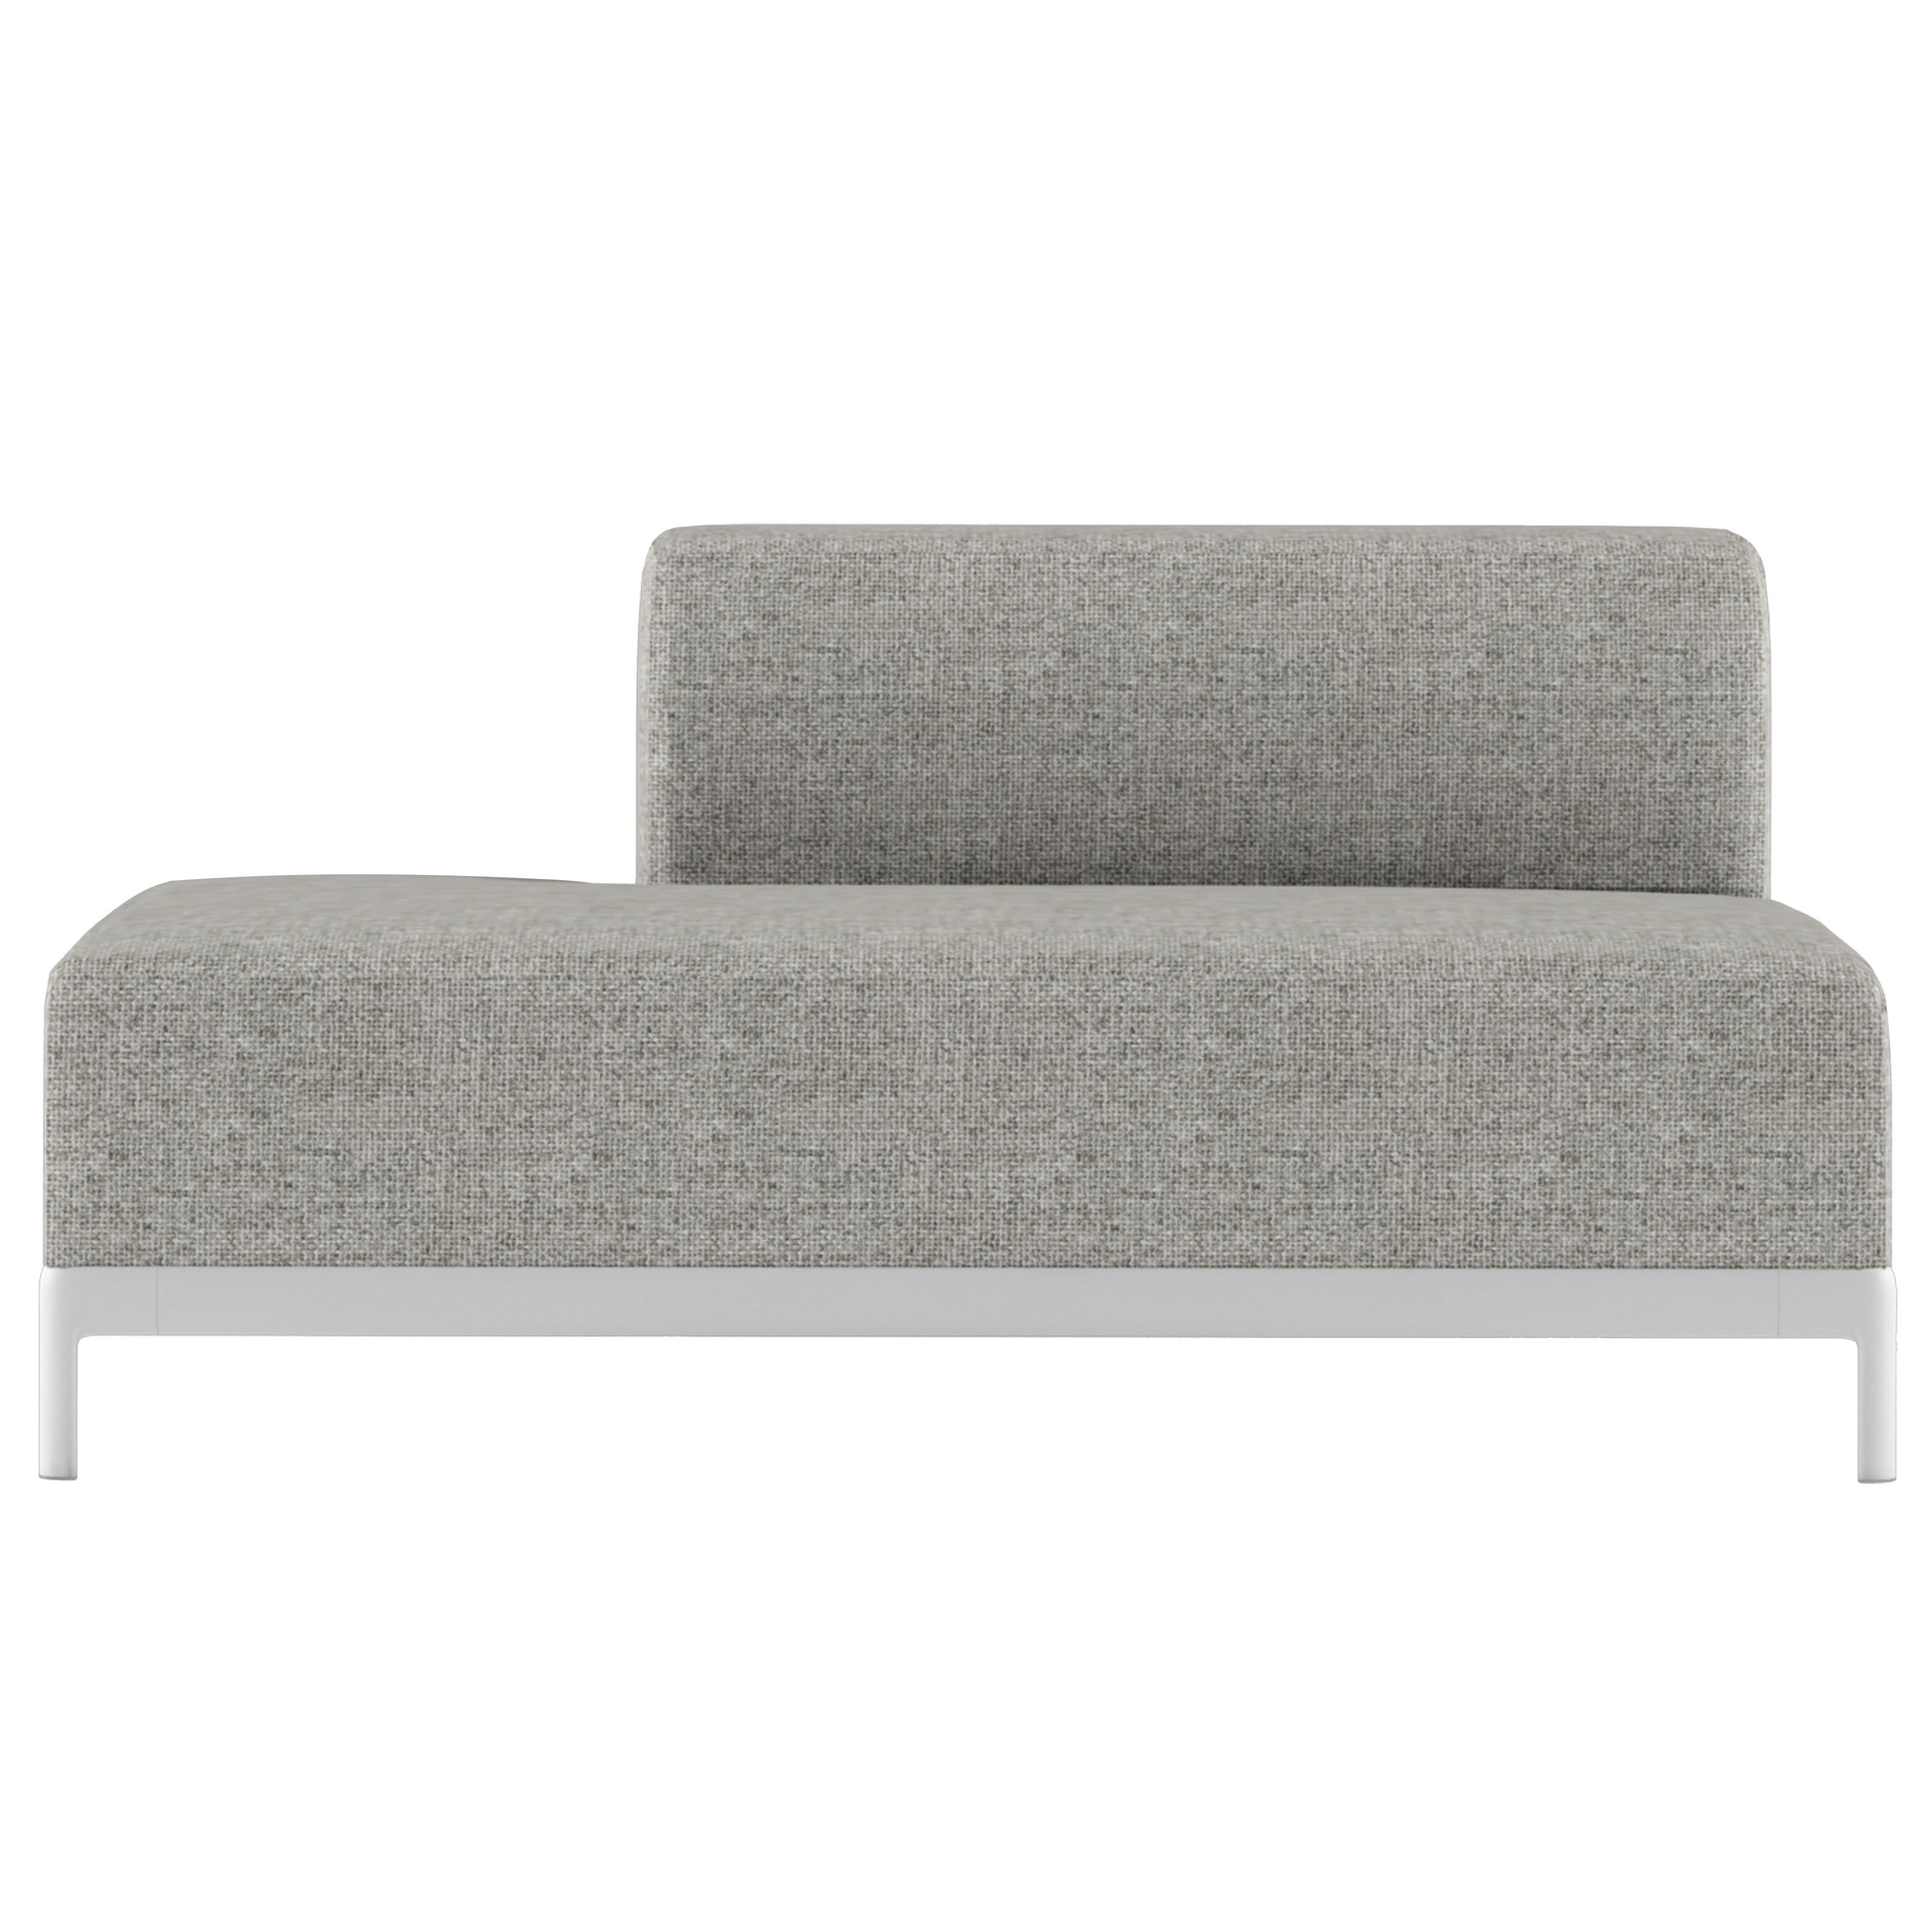 Alias P67 AluZen Soft Ending Sofa Outdoor SX in Upholstery with Aluminium Frame For Sale